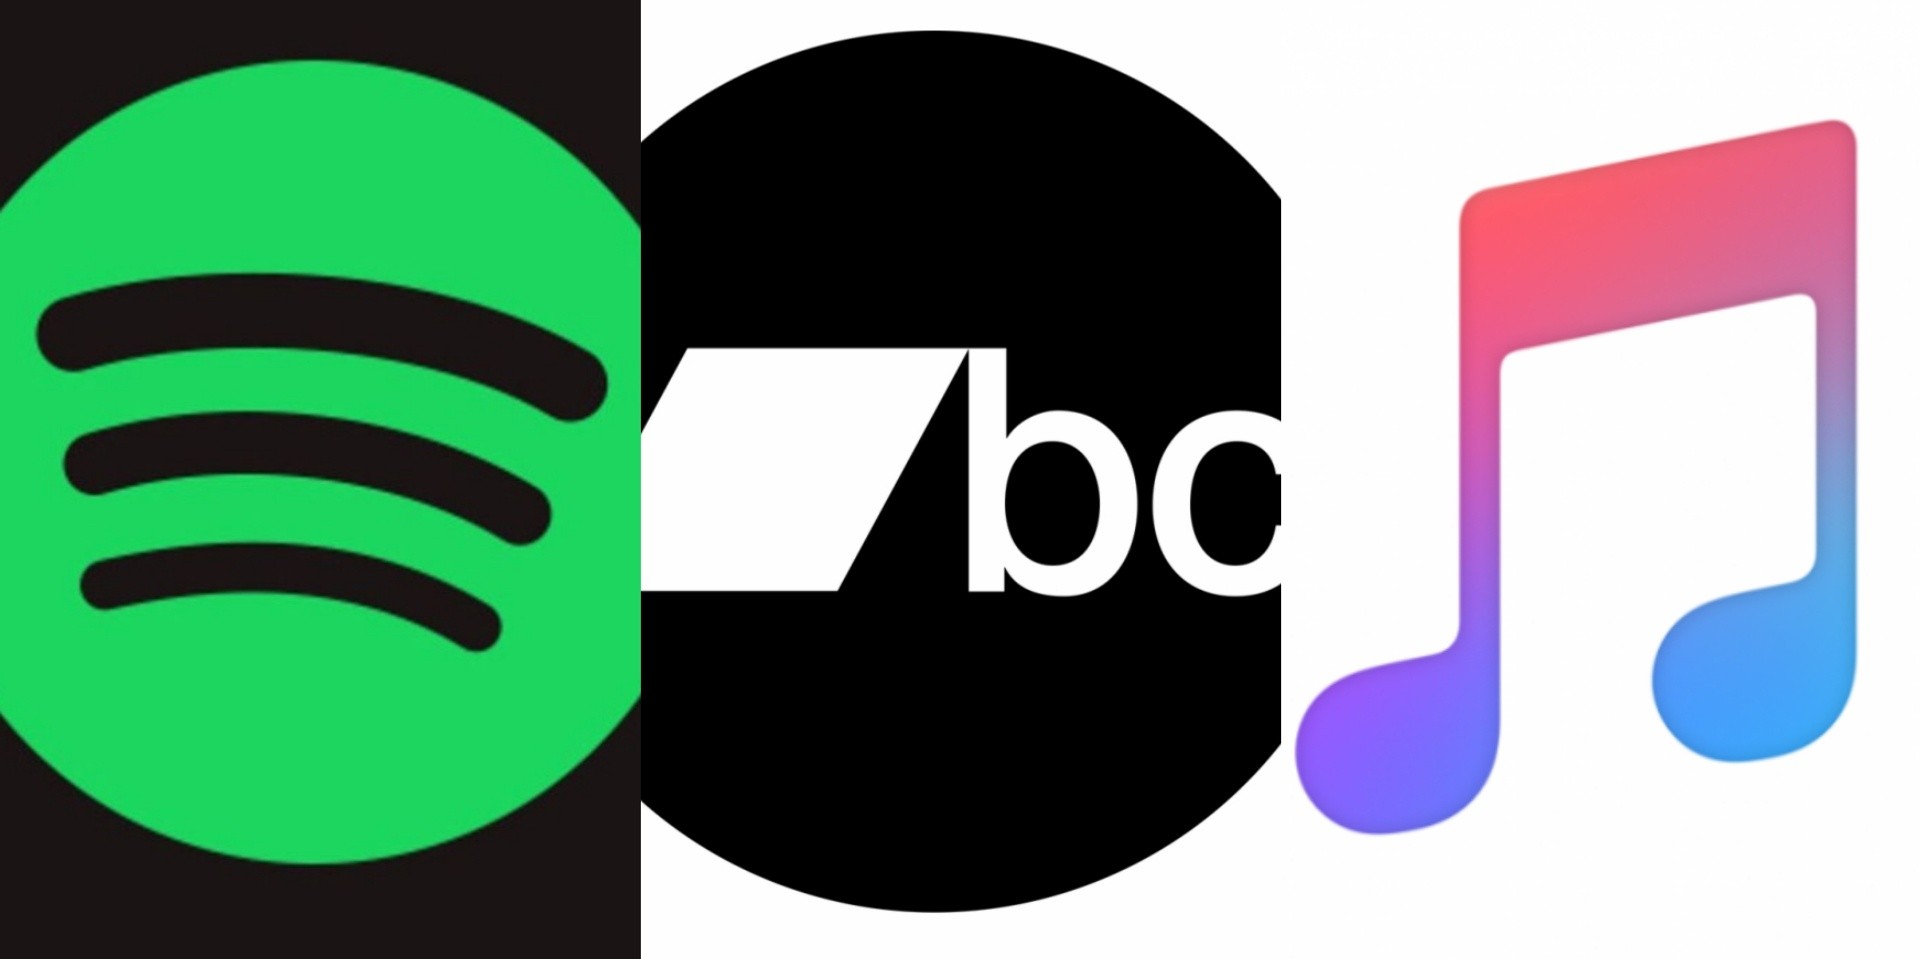 Music streaming now accounts for more than 80% of US consumption